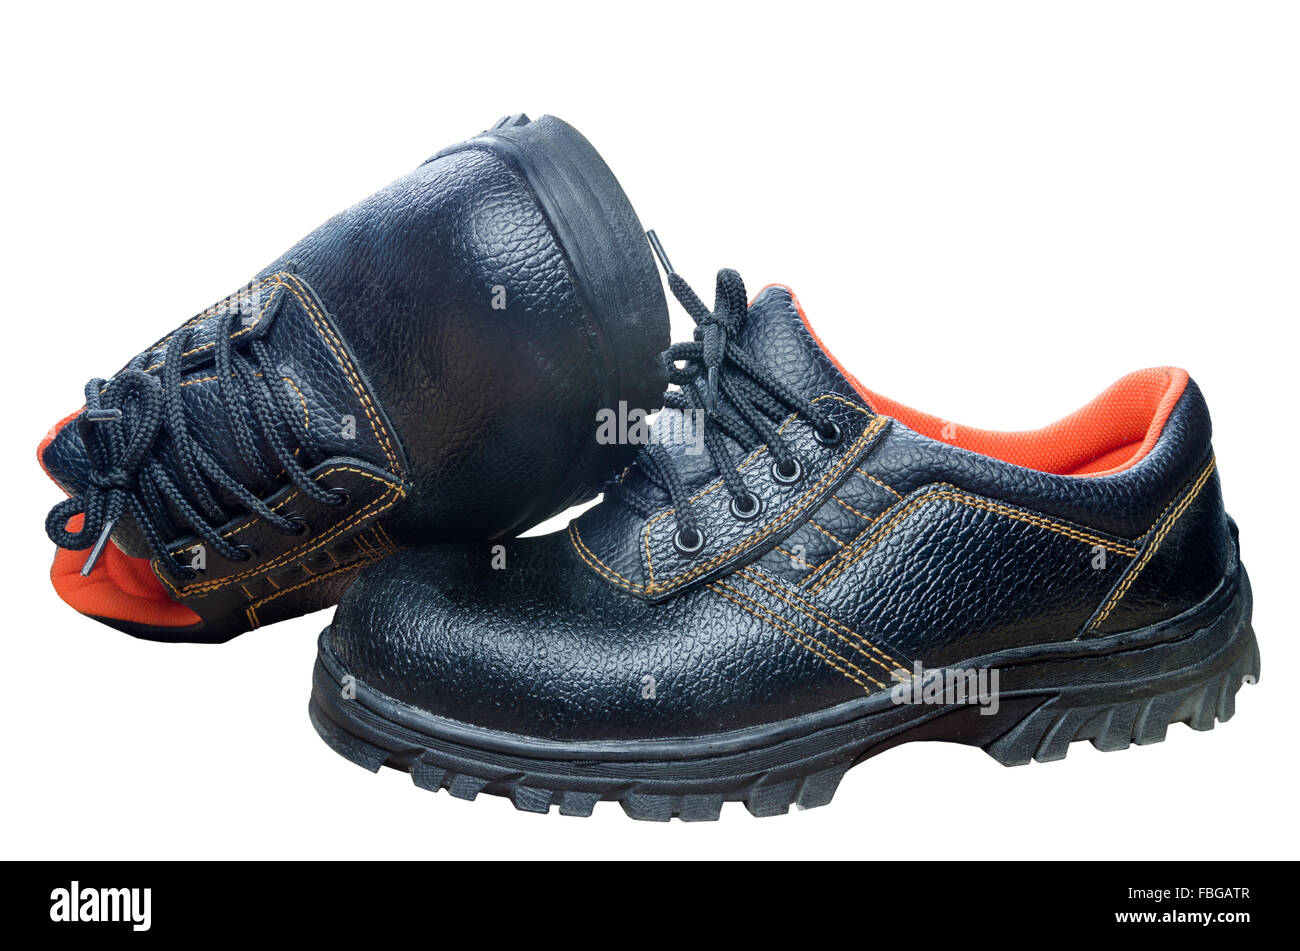 Black steel toe safety of steel cap work boots on white blackground. Stock Photo